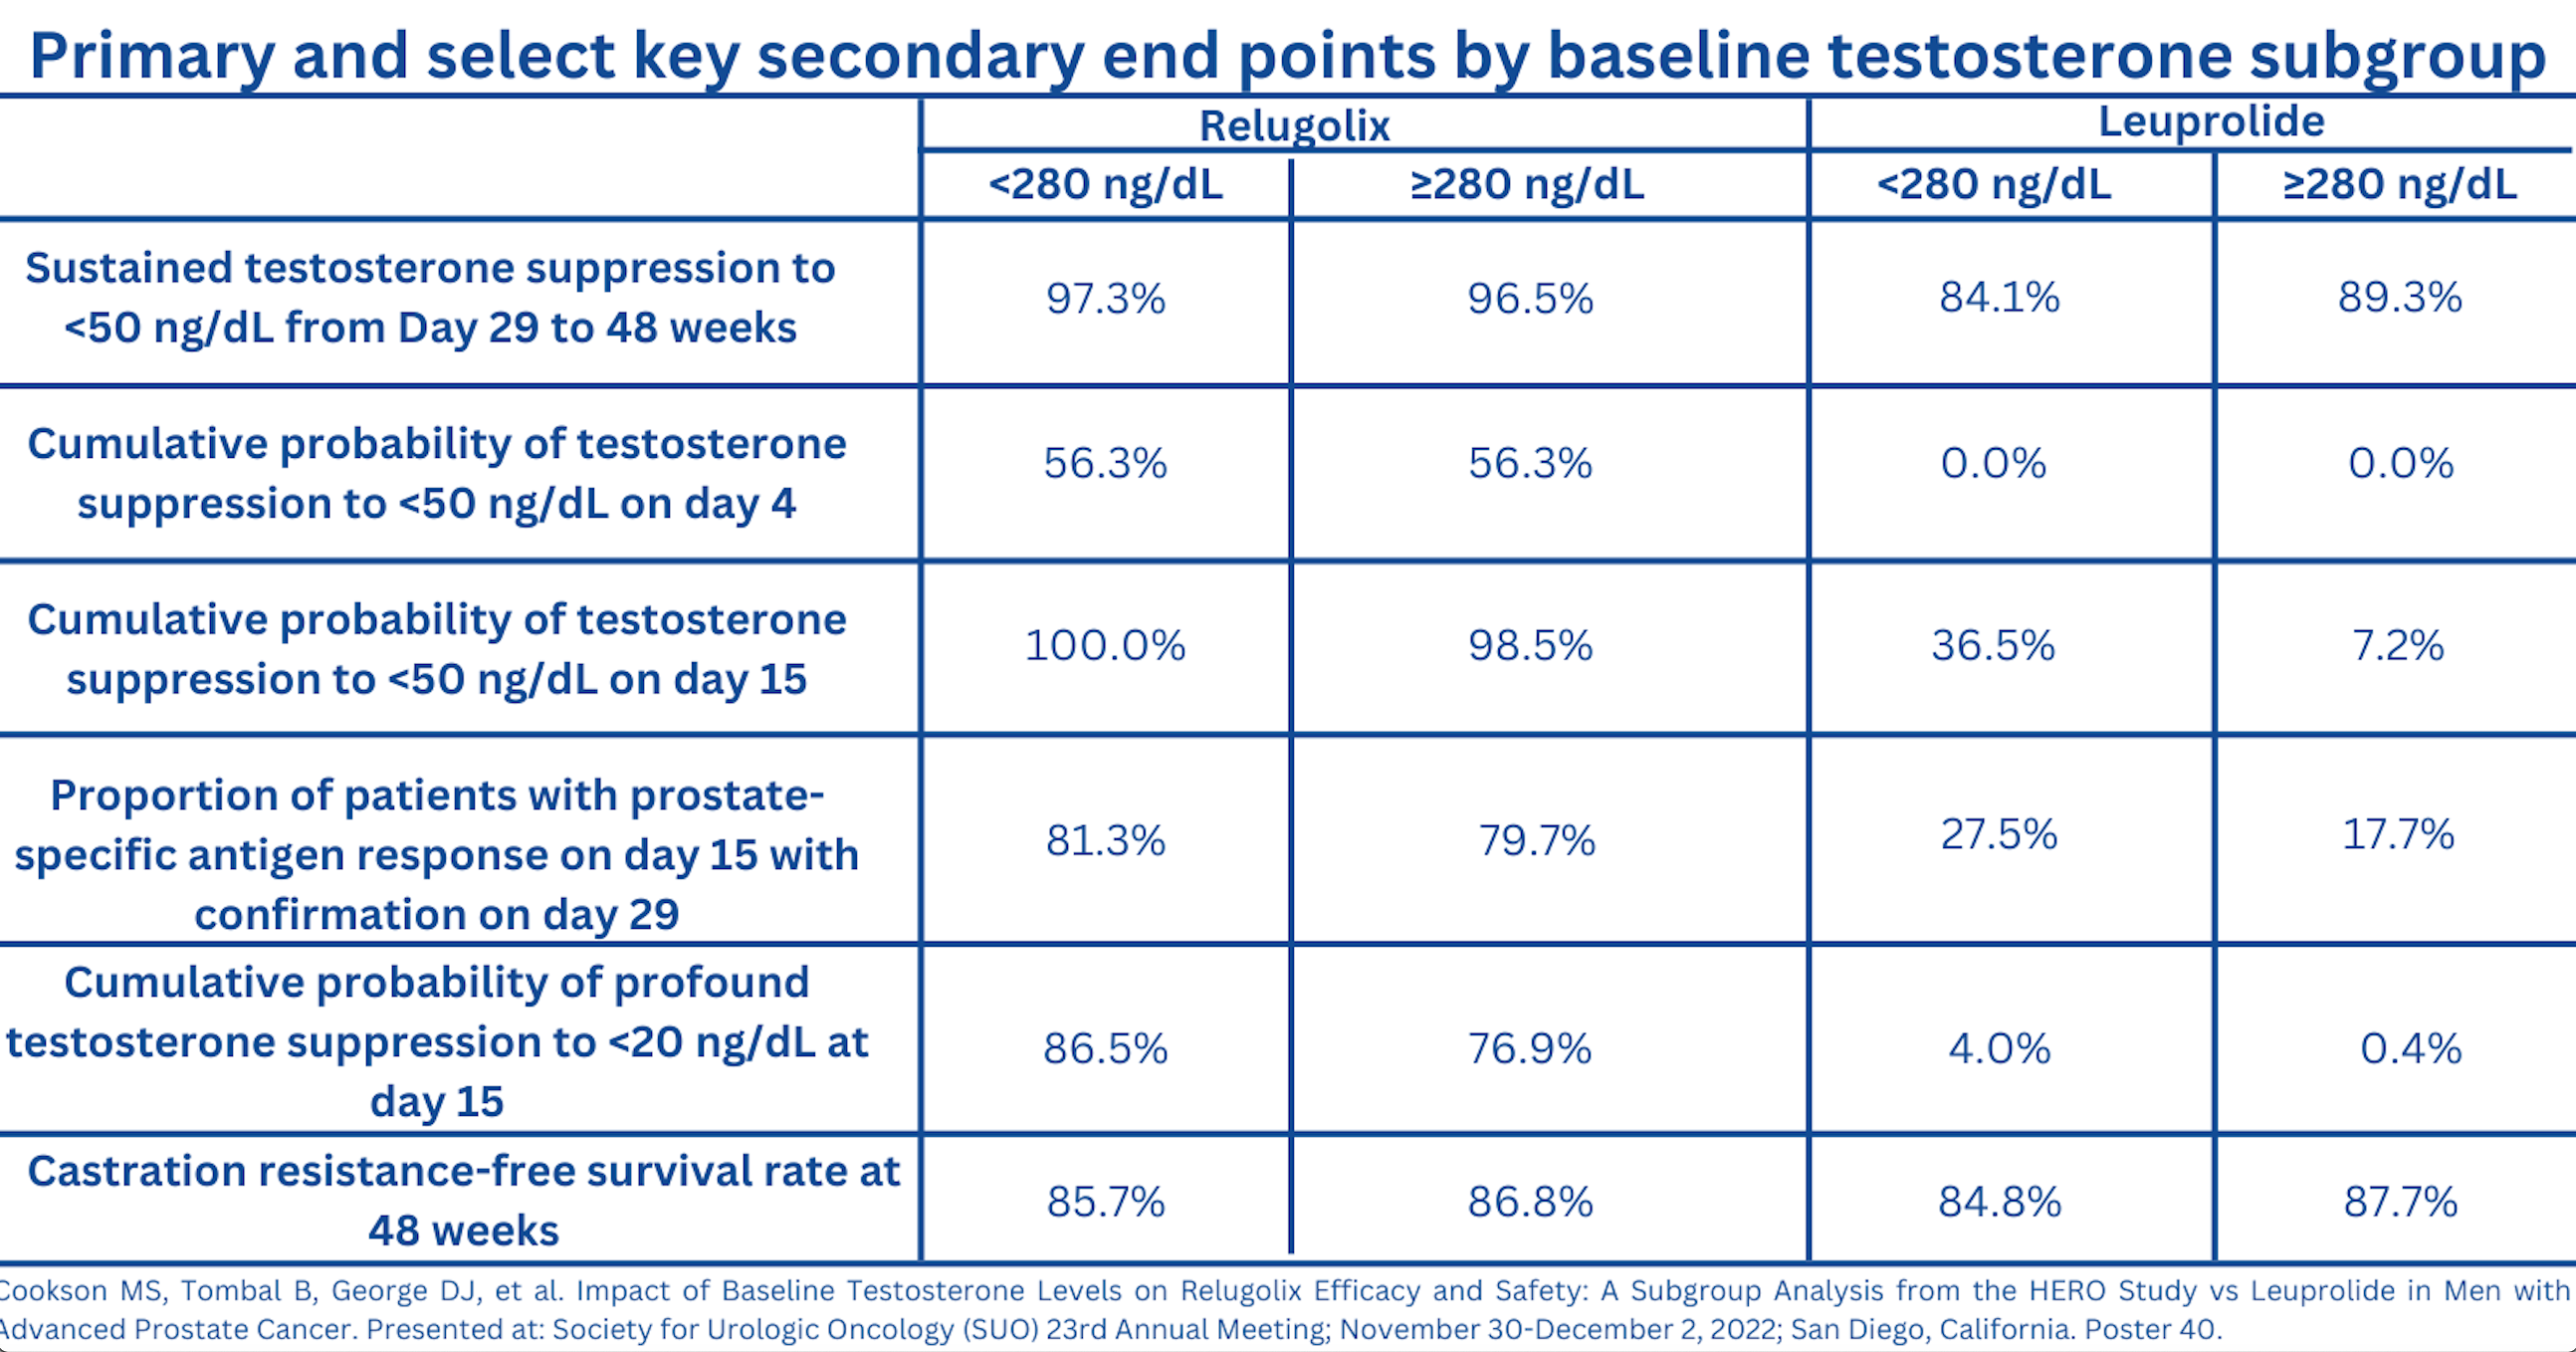 Primary and select key secondary end points by baseline testosterone subgroup from a subgroup analysis of the phase 3 HERO trial (NCT03085095).